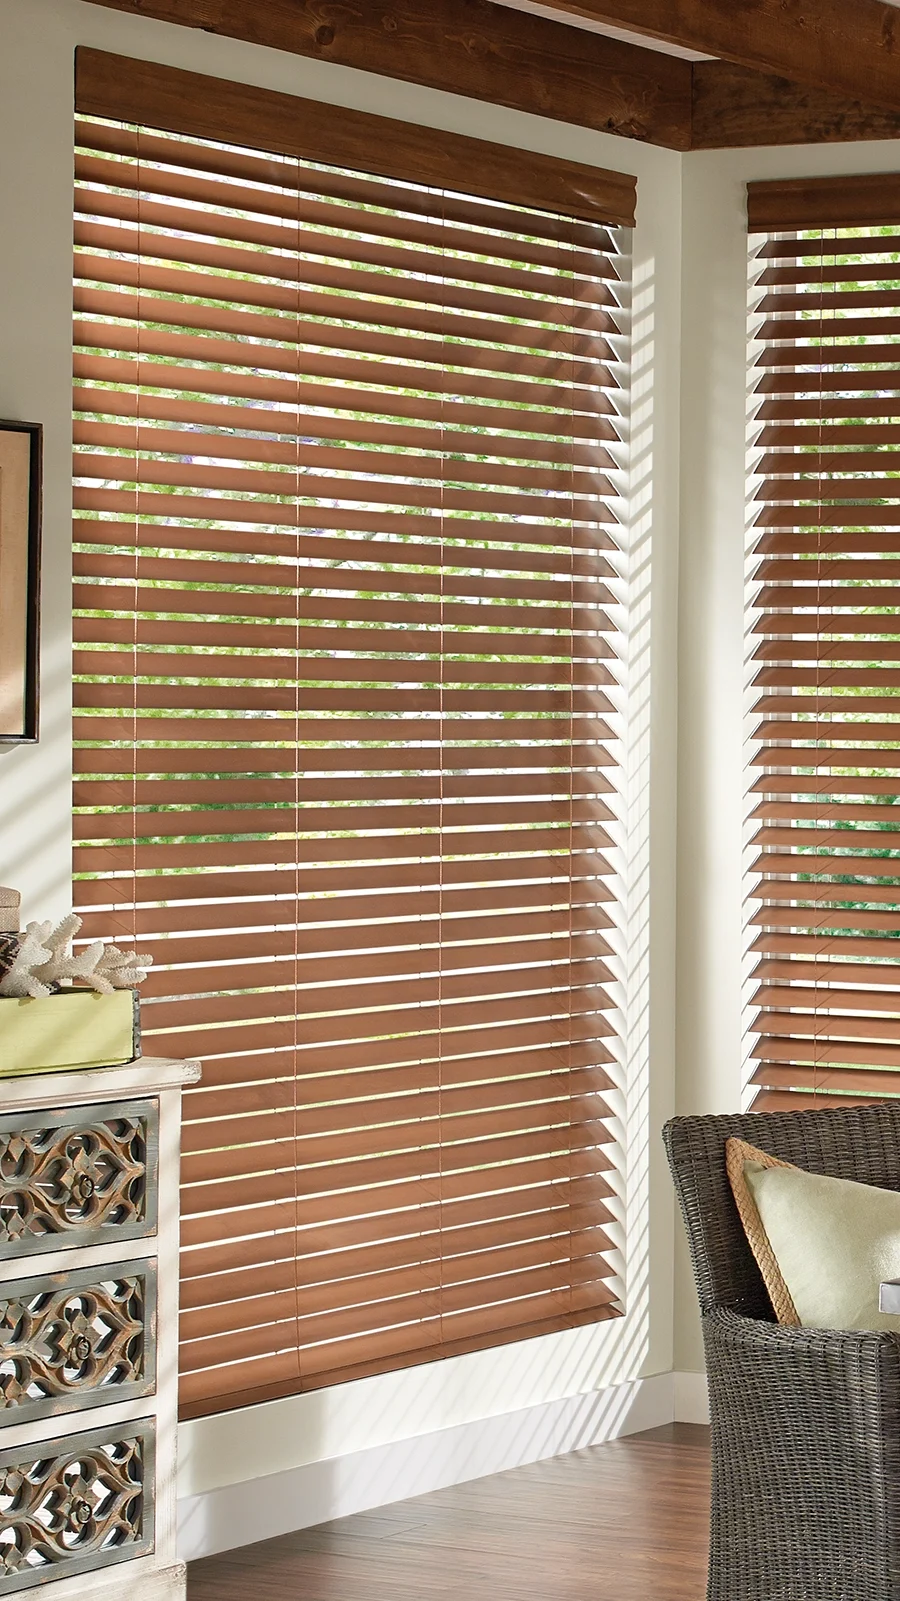 Wood blinds featured in rustic dining room.